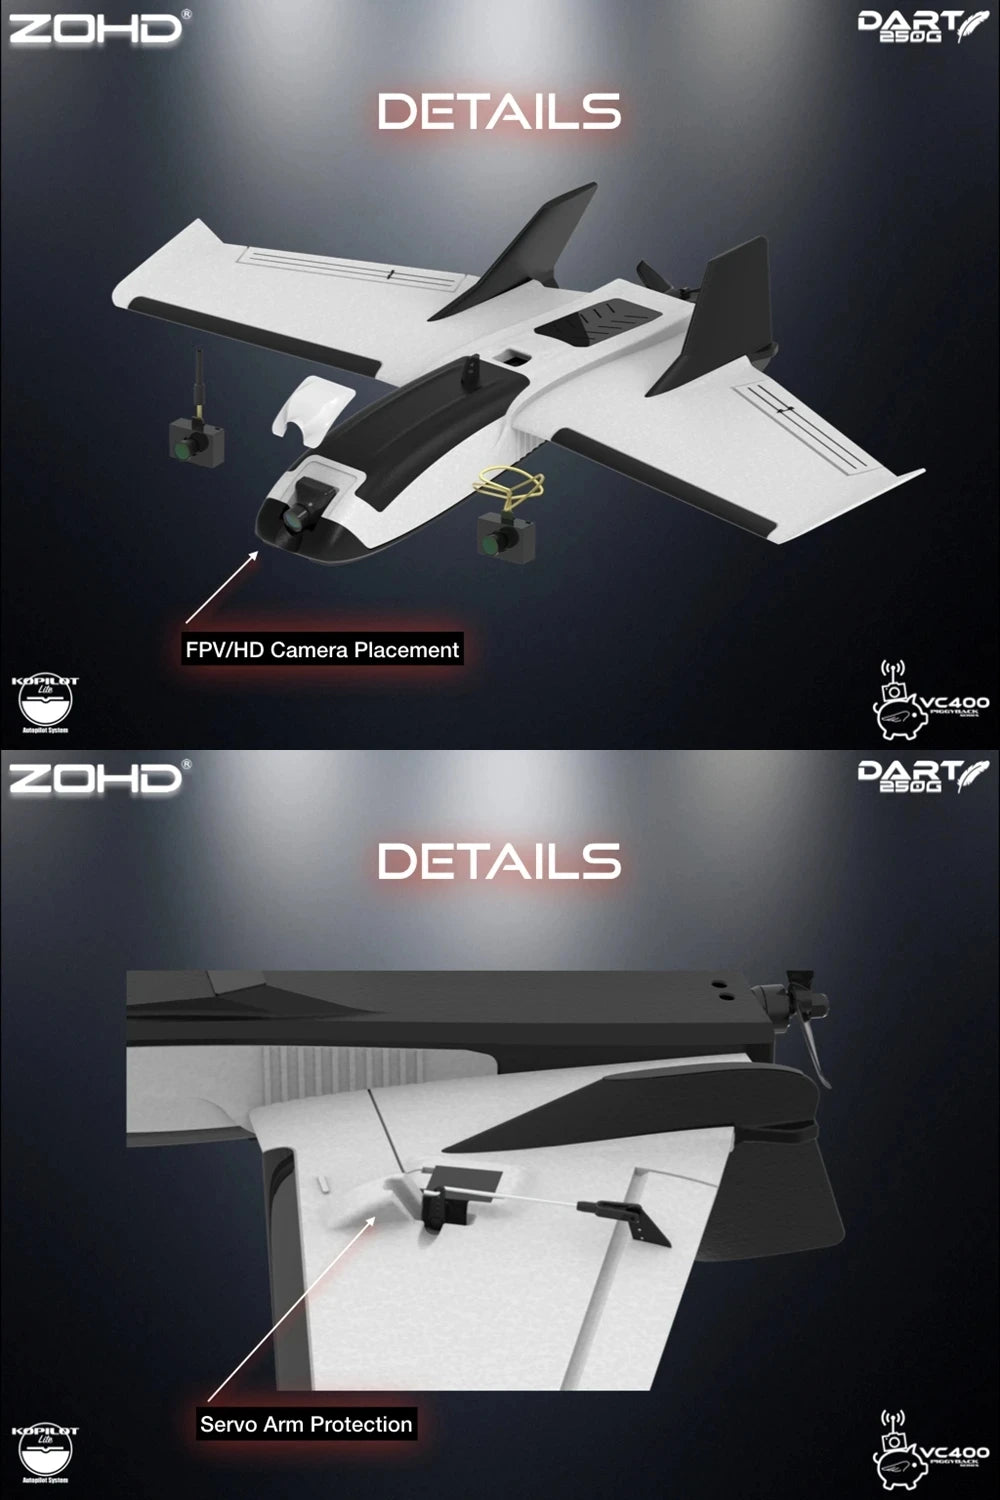 ZOHD Dart Wingspan RC Airplane, ZOHID7 DDozT( DETAILS FPVIHD Camera Place